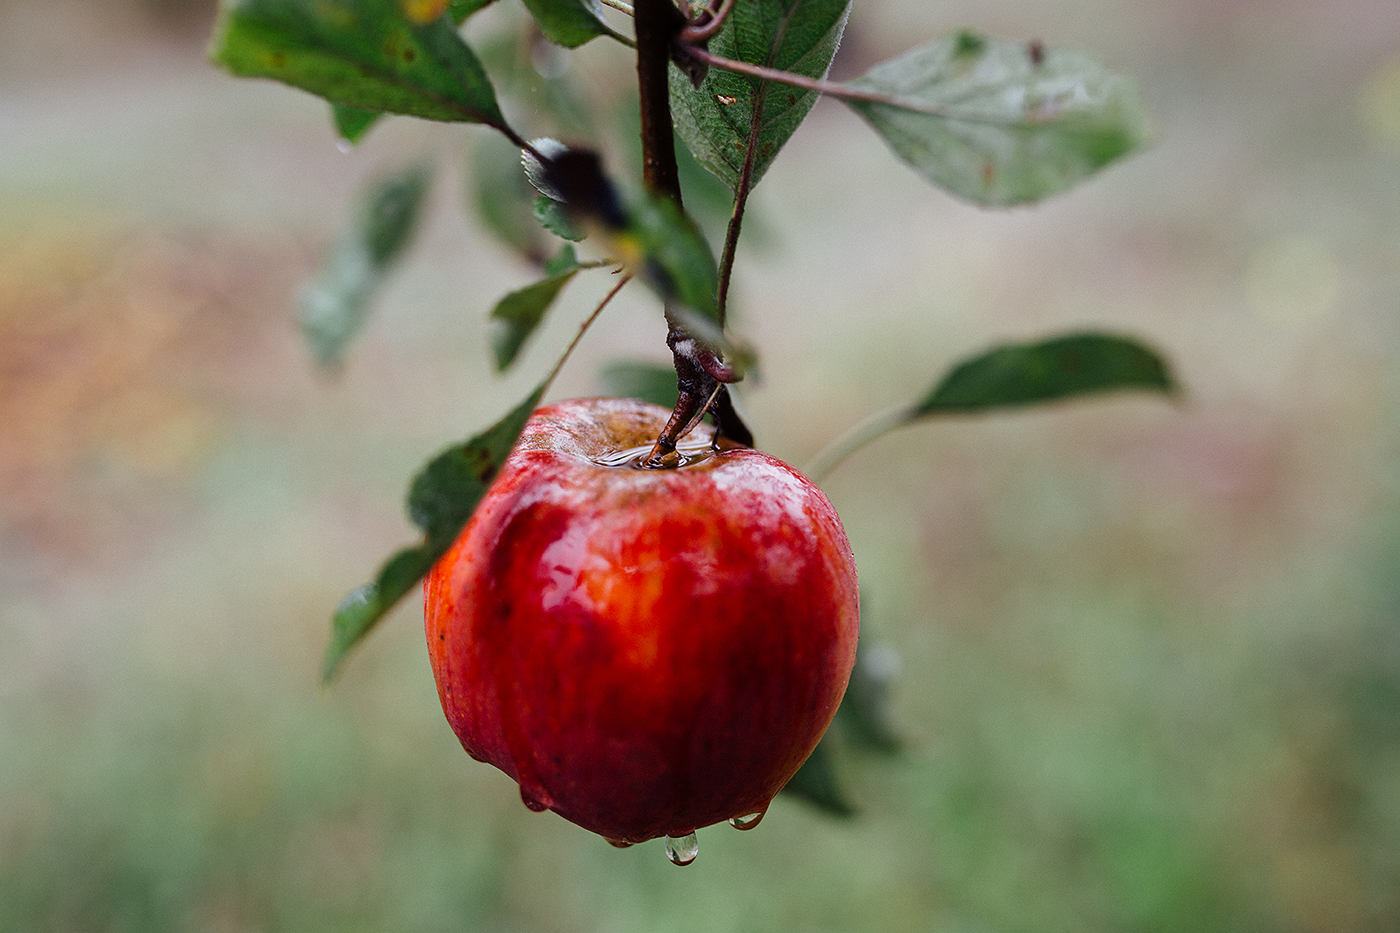 A perfect red apple, dripping with raindrops 